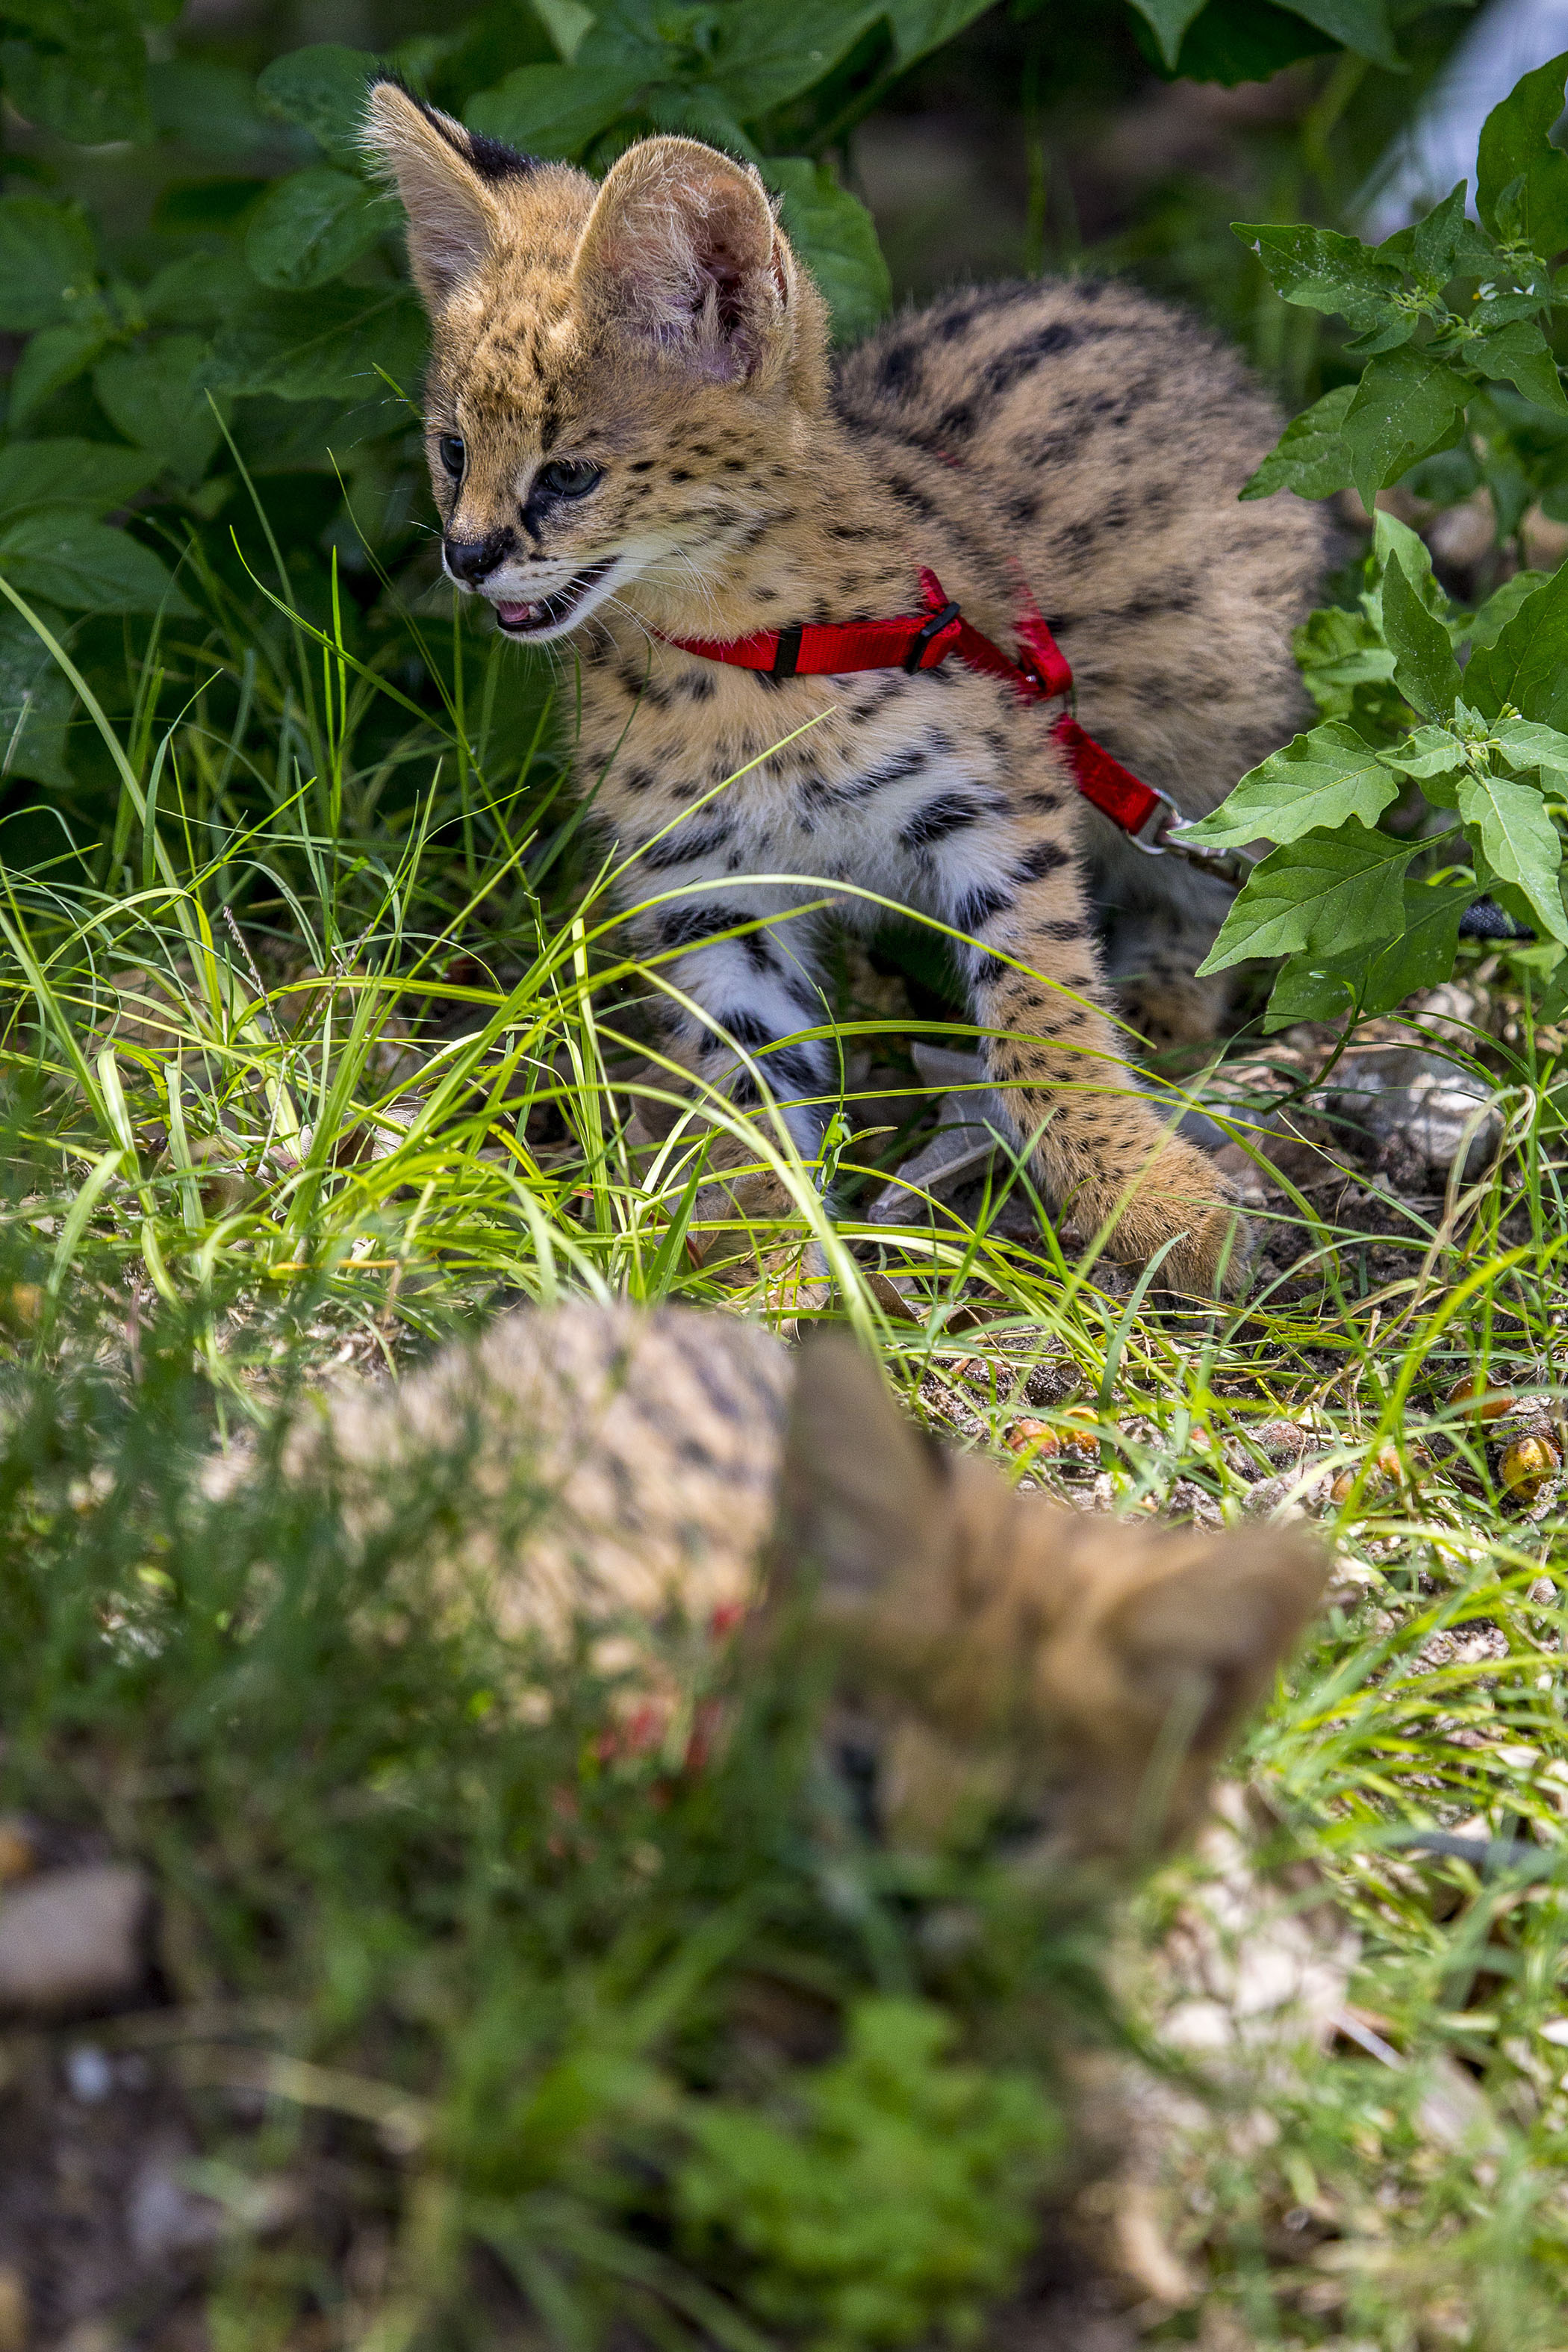 Serval kittens Baku and Cleo playing in the historic gardens at Naples Zoo.